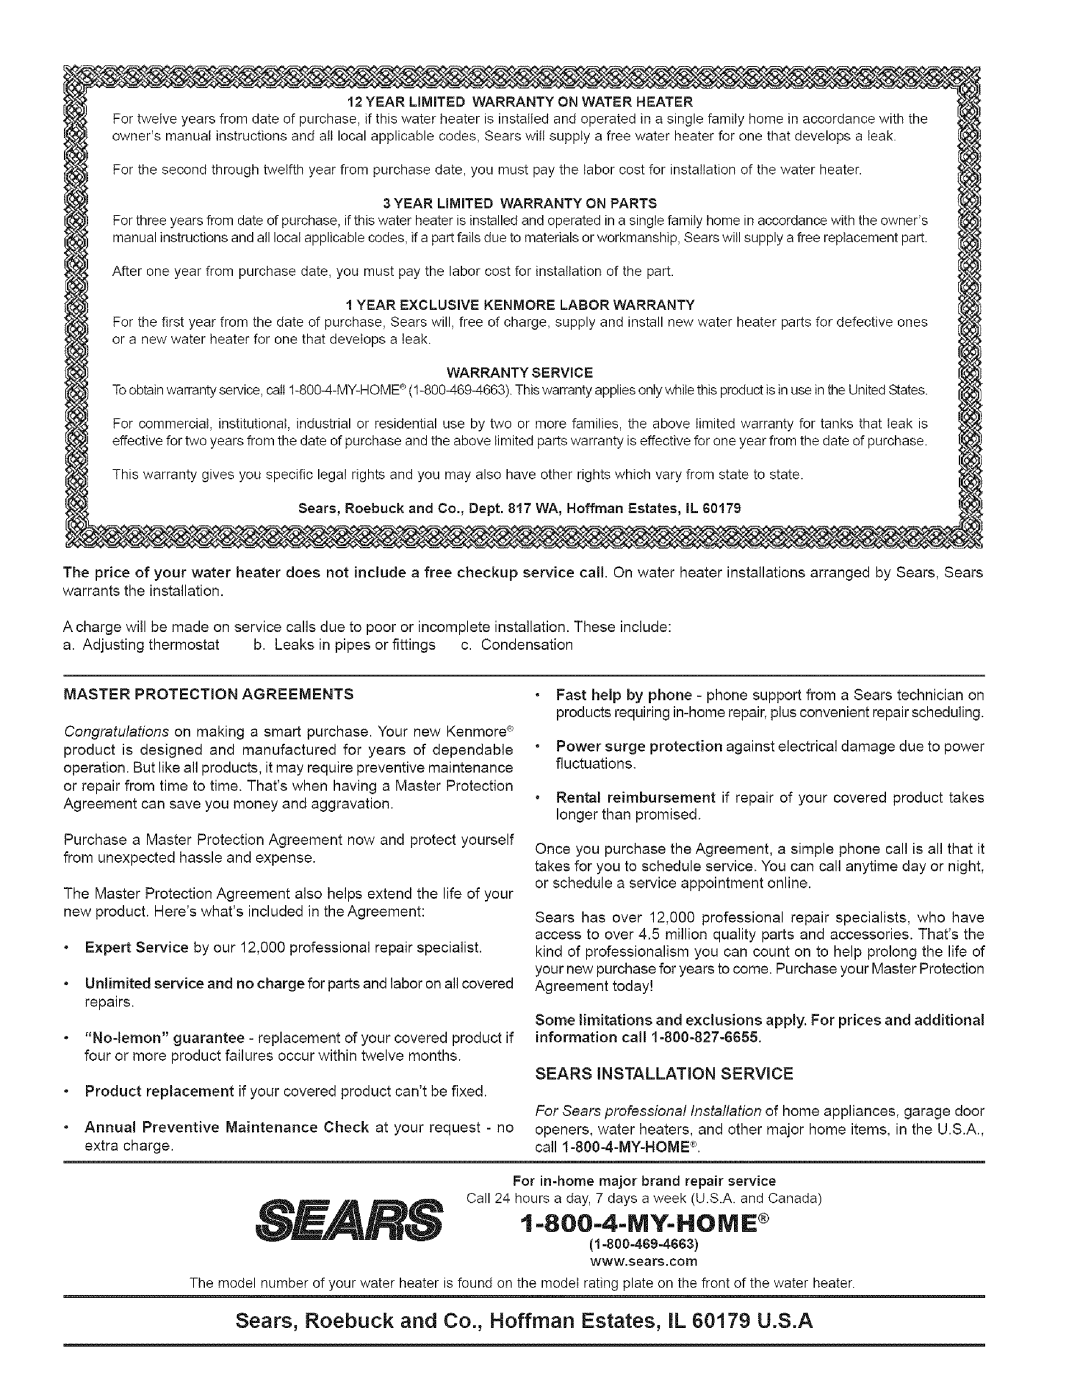 Kenmore 530, 334 owner manual t -800-4-MY-HOME, Sears Installation Service, Master Protection Agreements 